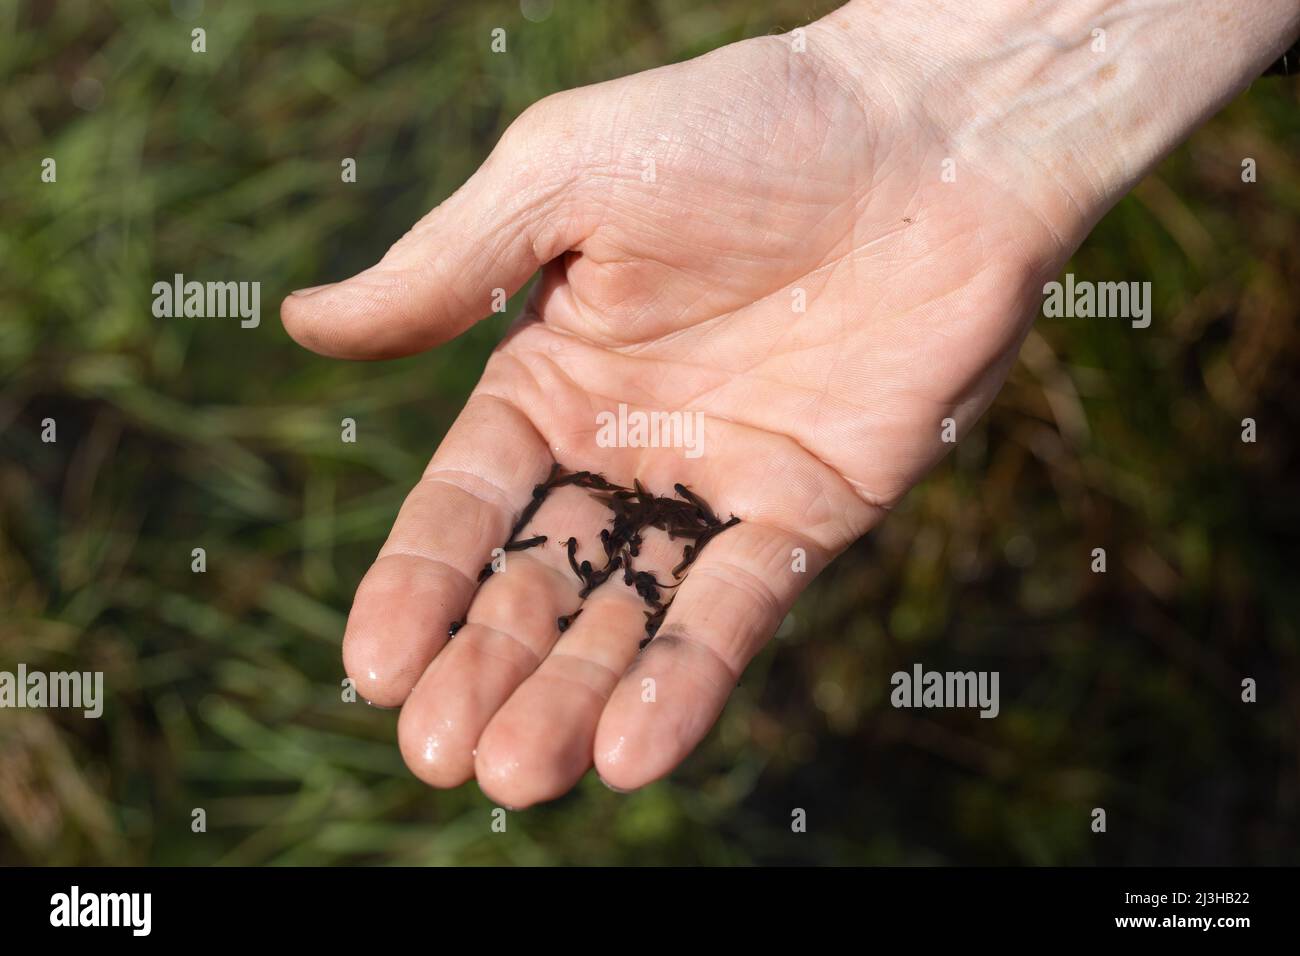 Tadpoles, also known as pollywogs or polliwogs, held in hand, from a natural pond. Stock Photo